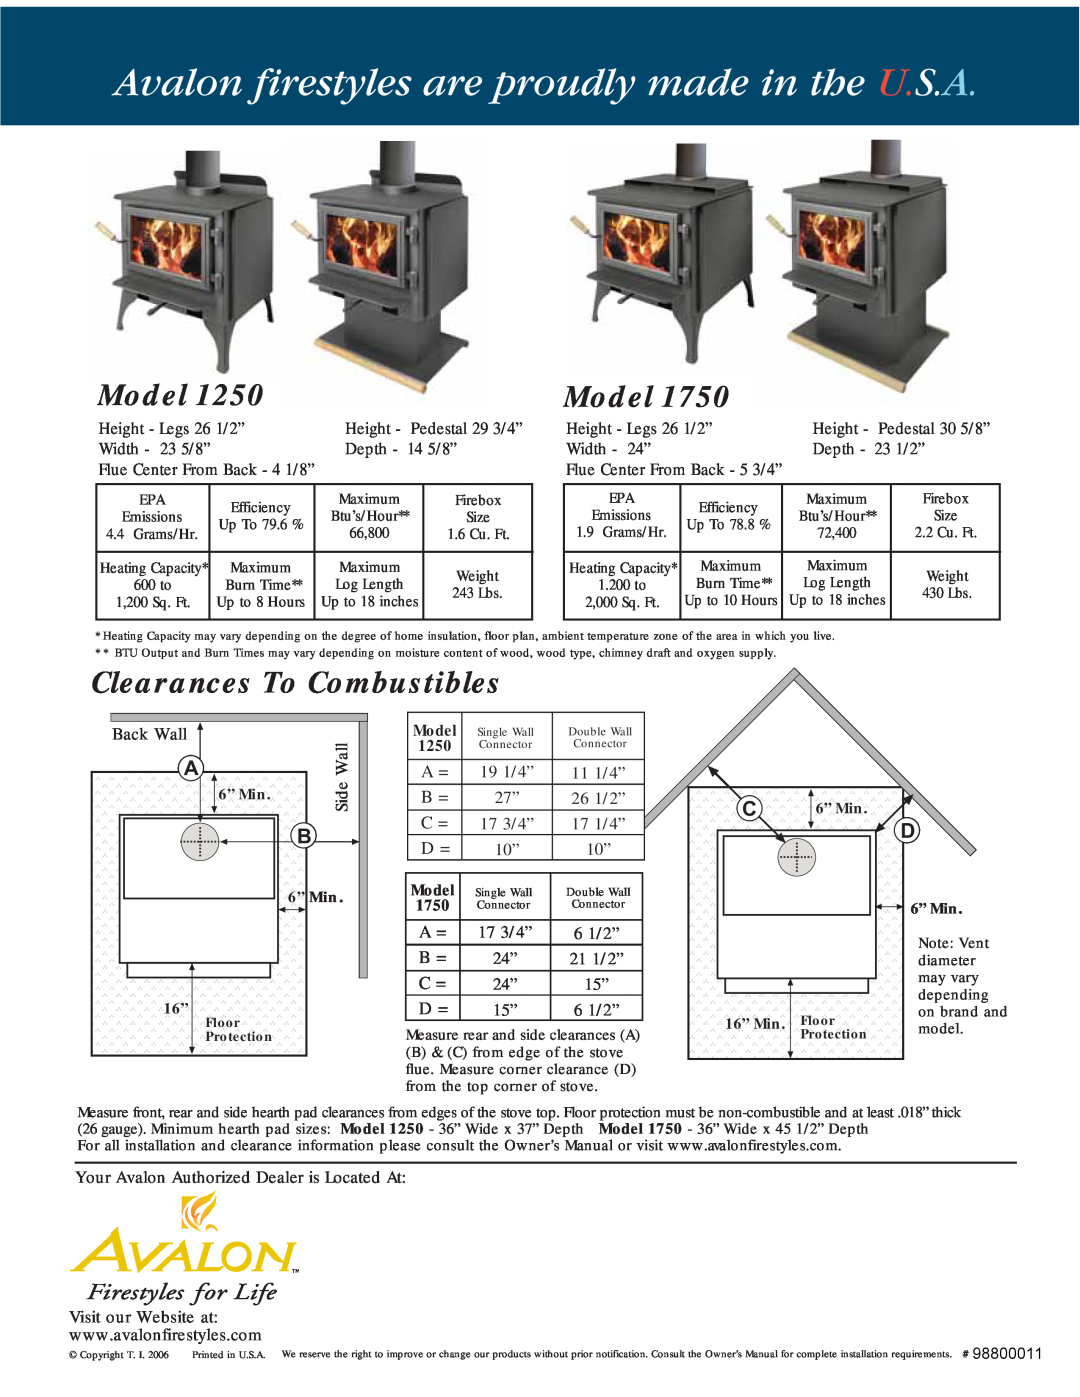 Avalon Stoves 1250, 1750 manual Model, Clearances To Combustibles 